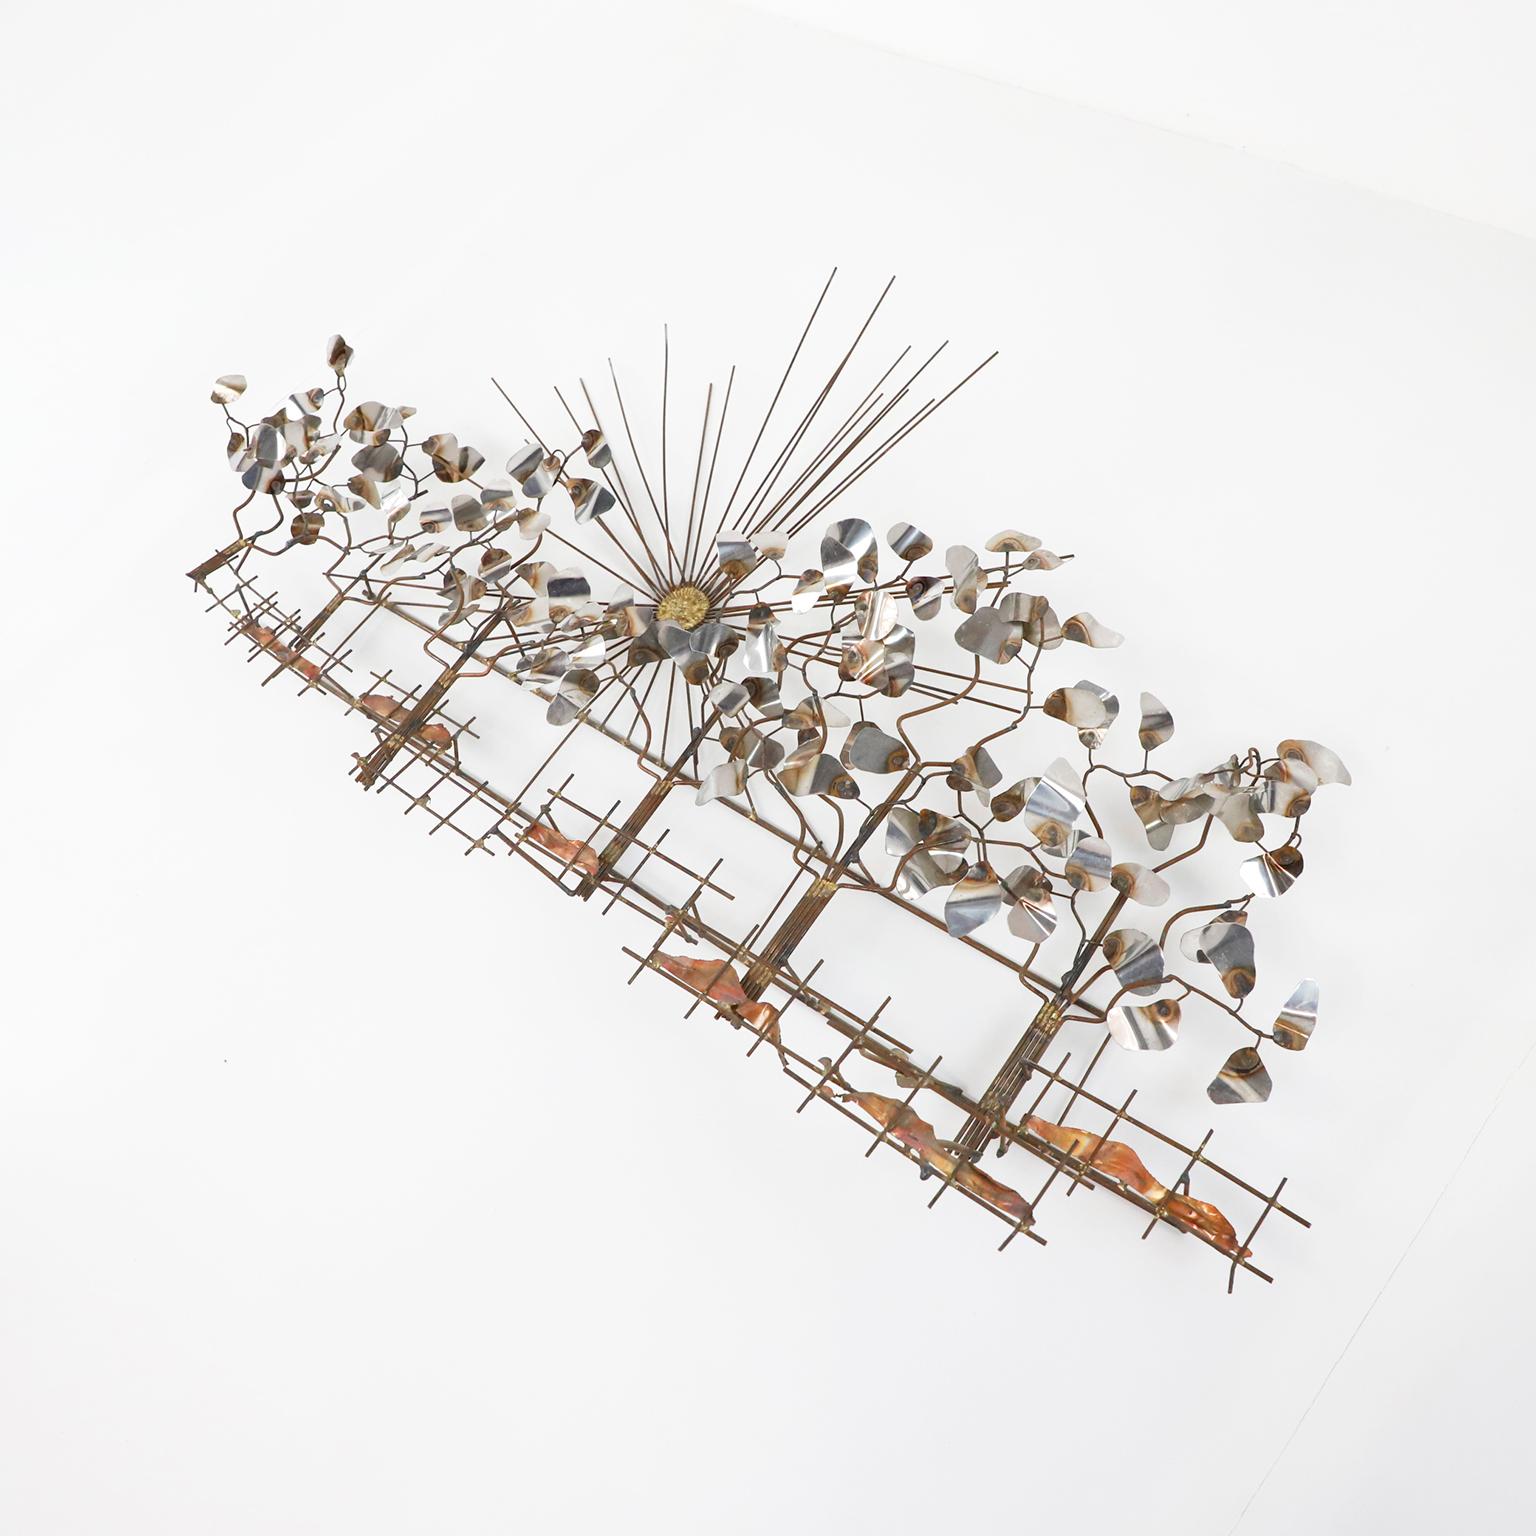 Circa 1960. We offer this Brutalist brass wall sculpture in the style of Curtis Jere.